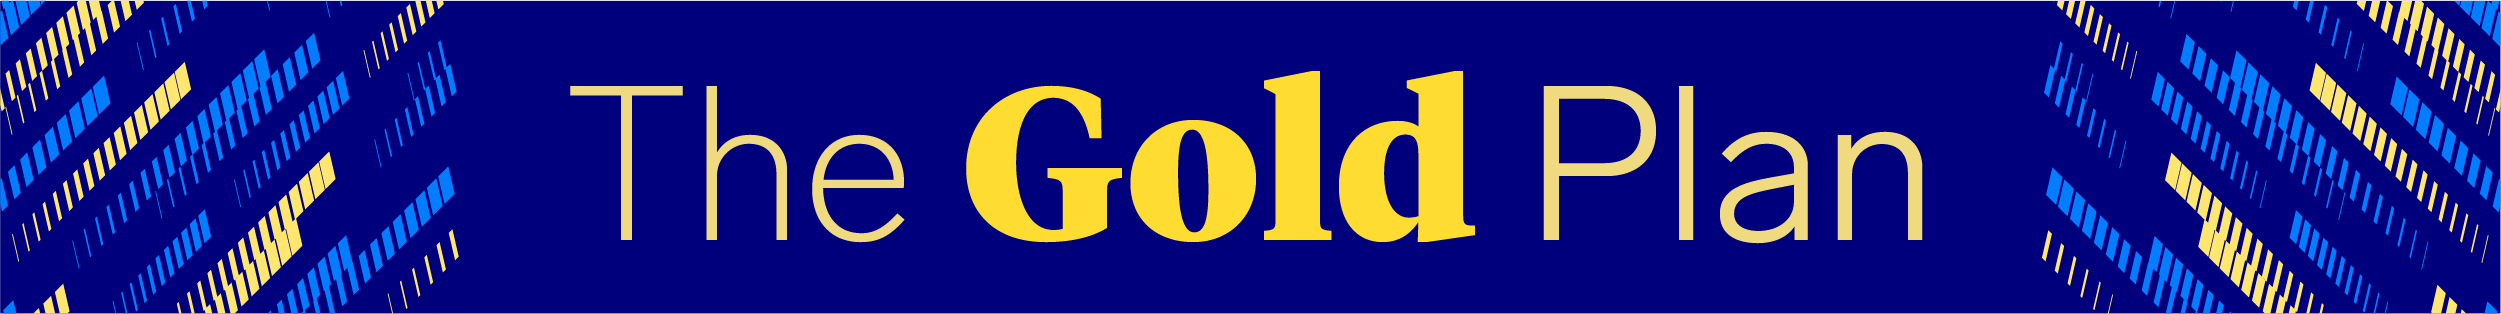 A blue and gold banner that reads, "The Gold Plan"